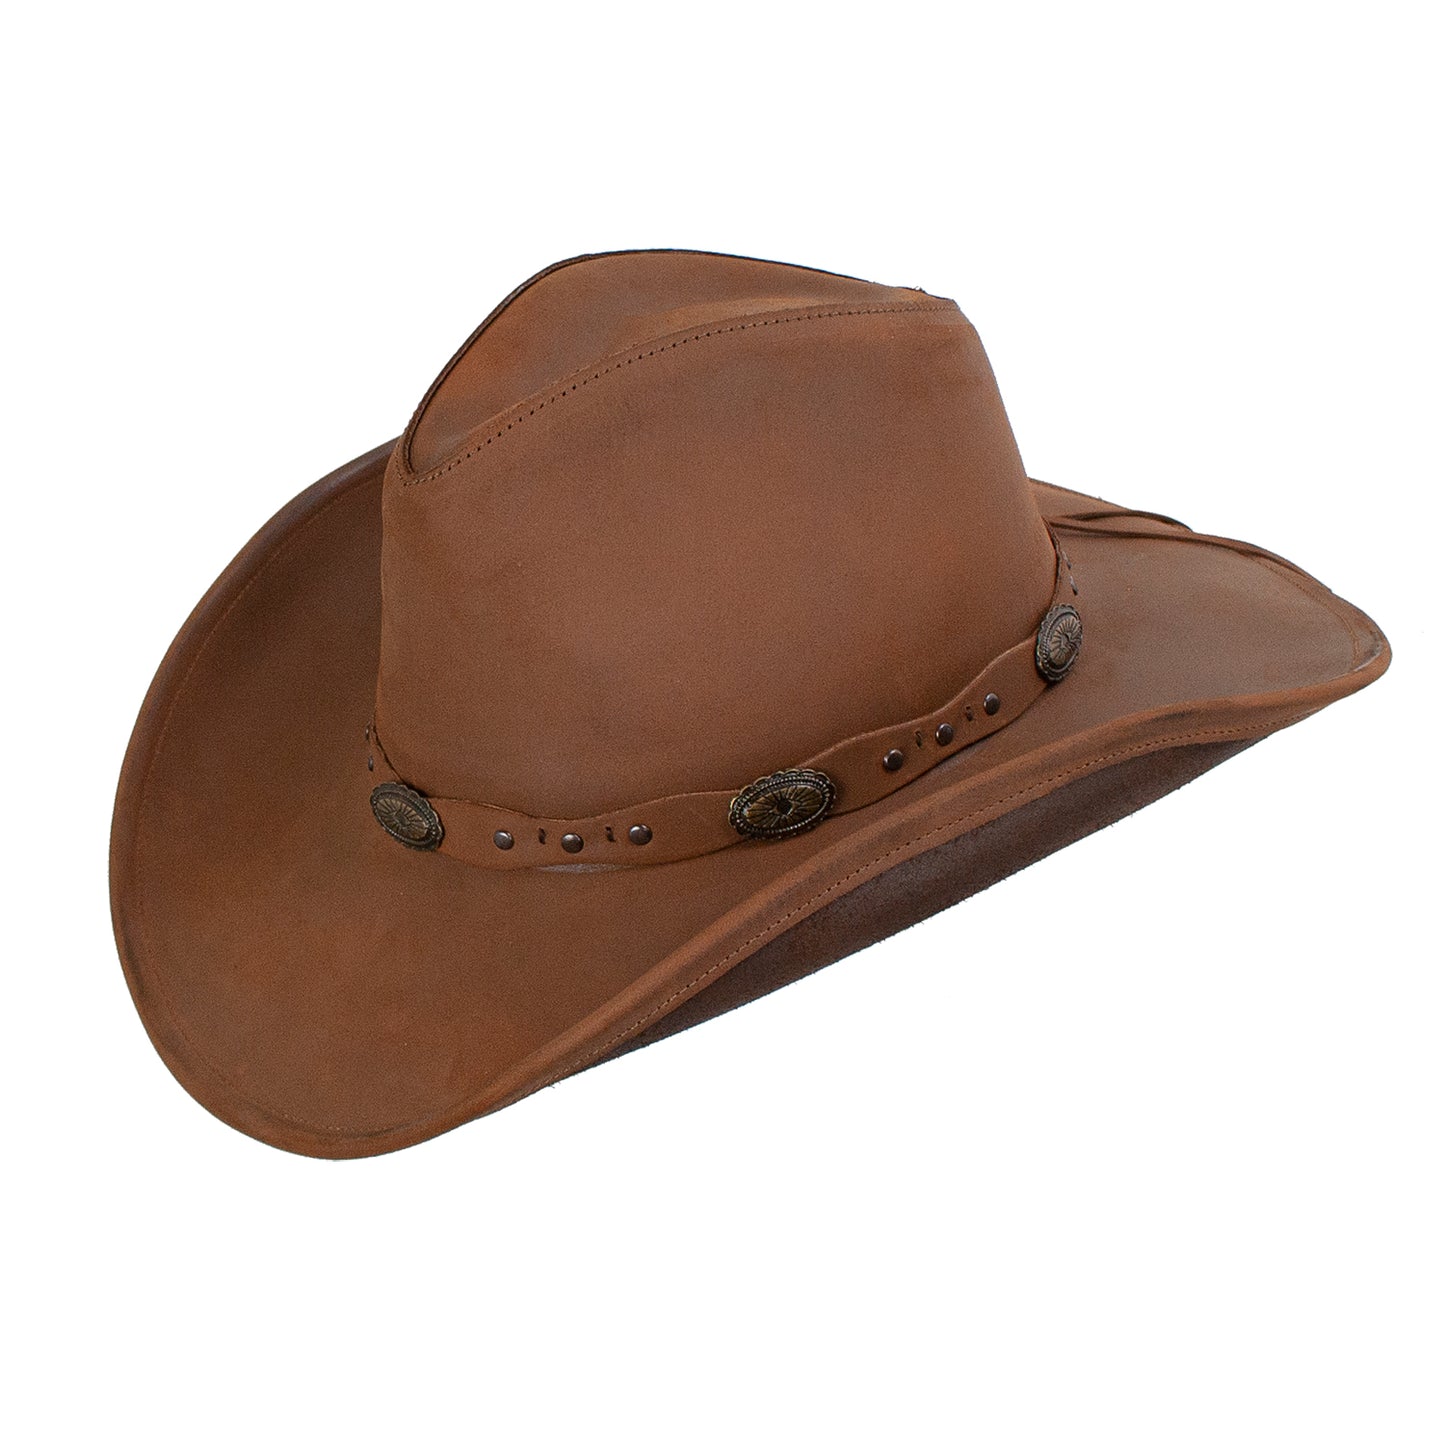 Bartlett Brown Leather Cowboy Hat by Peter Grimm - Bourbon Cowgirl